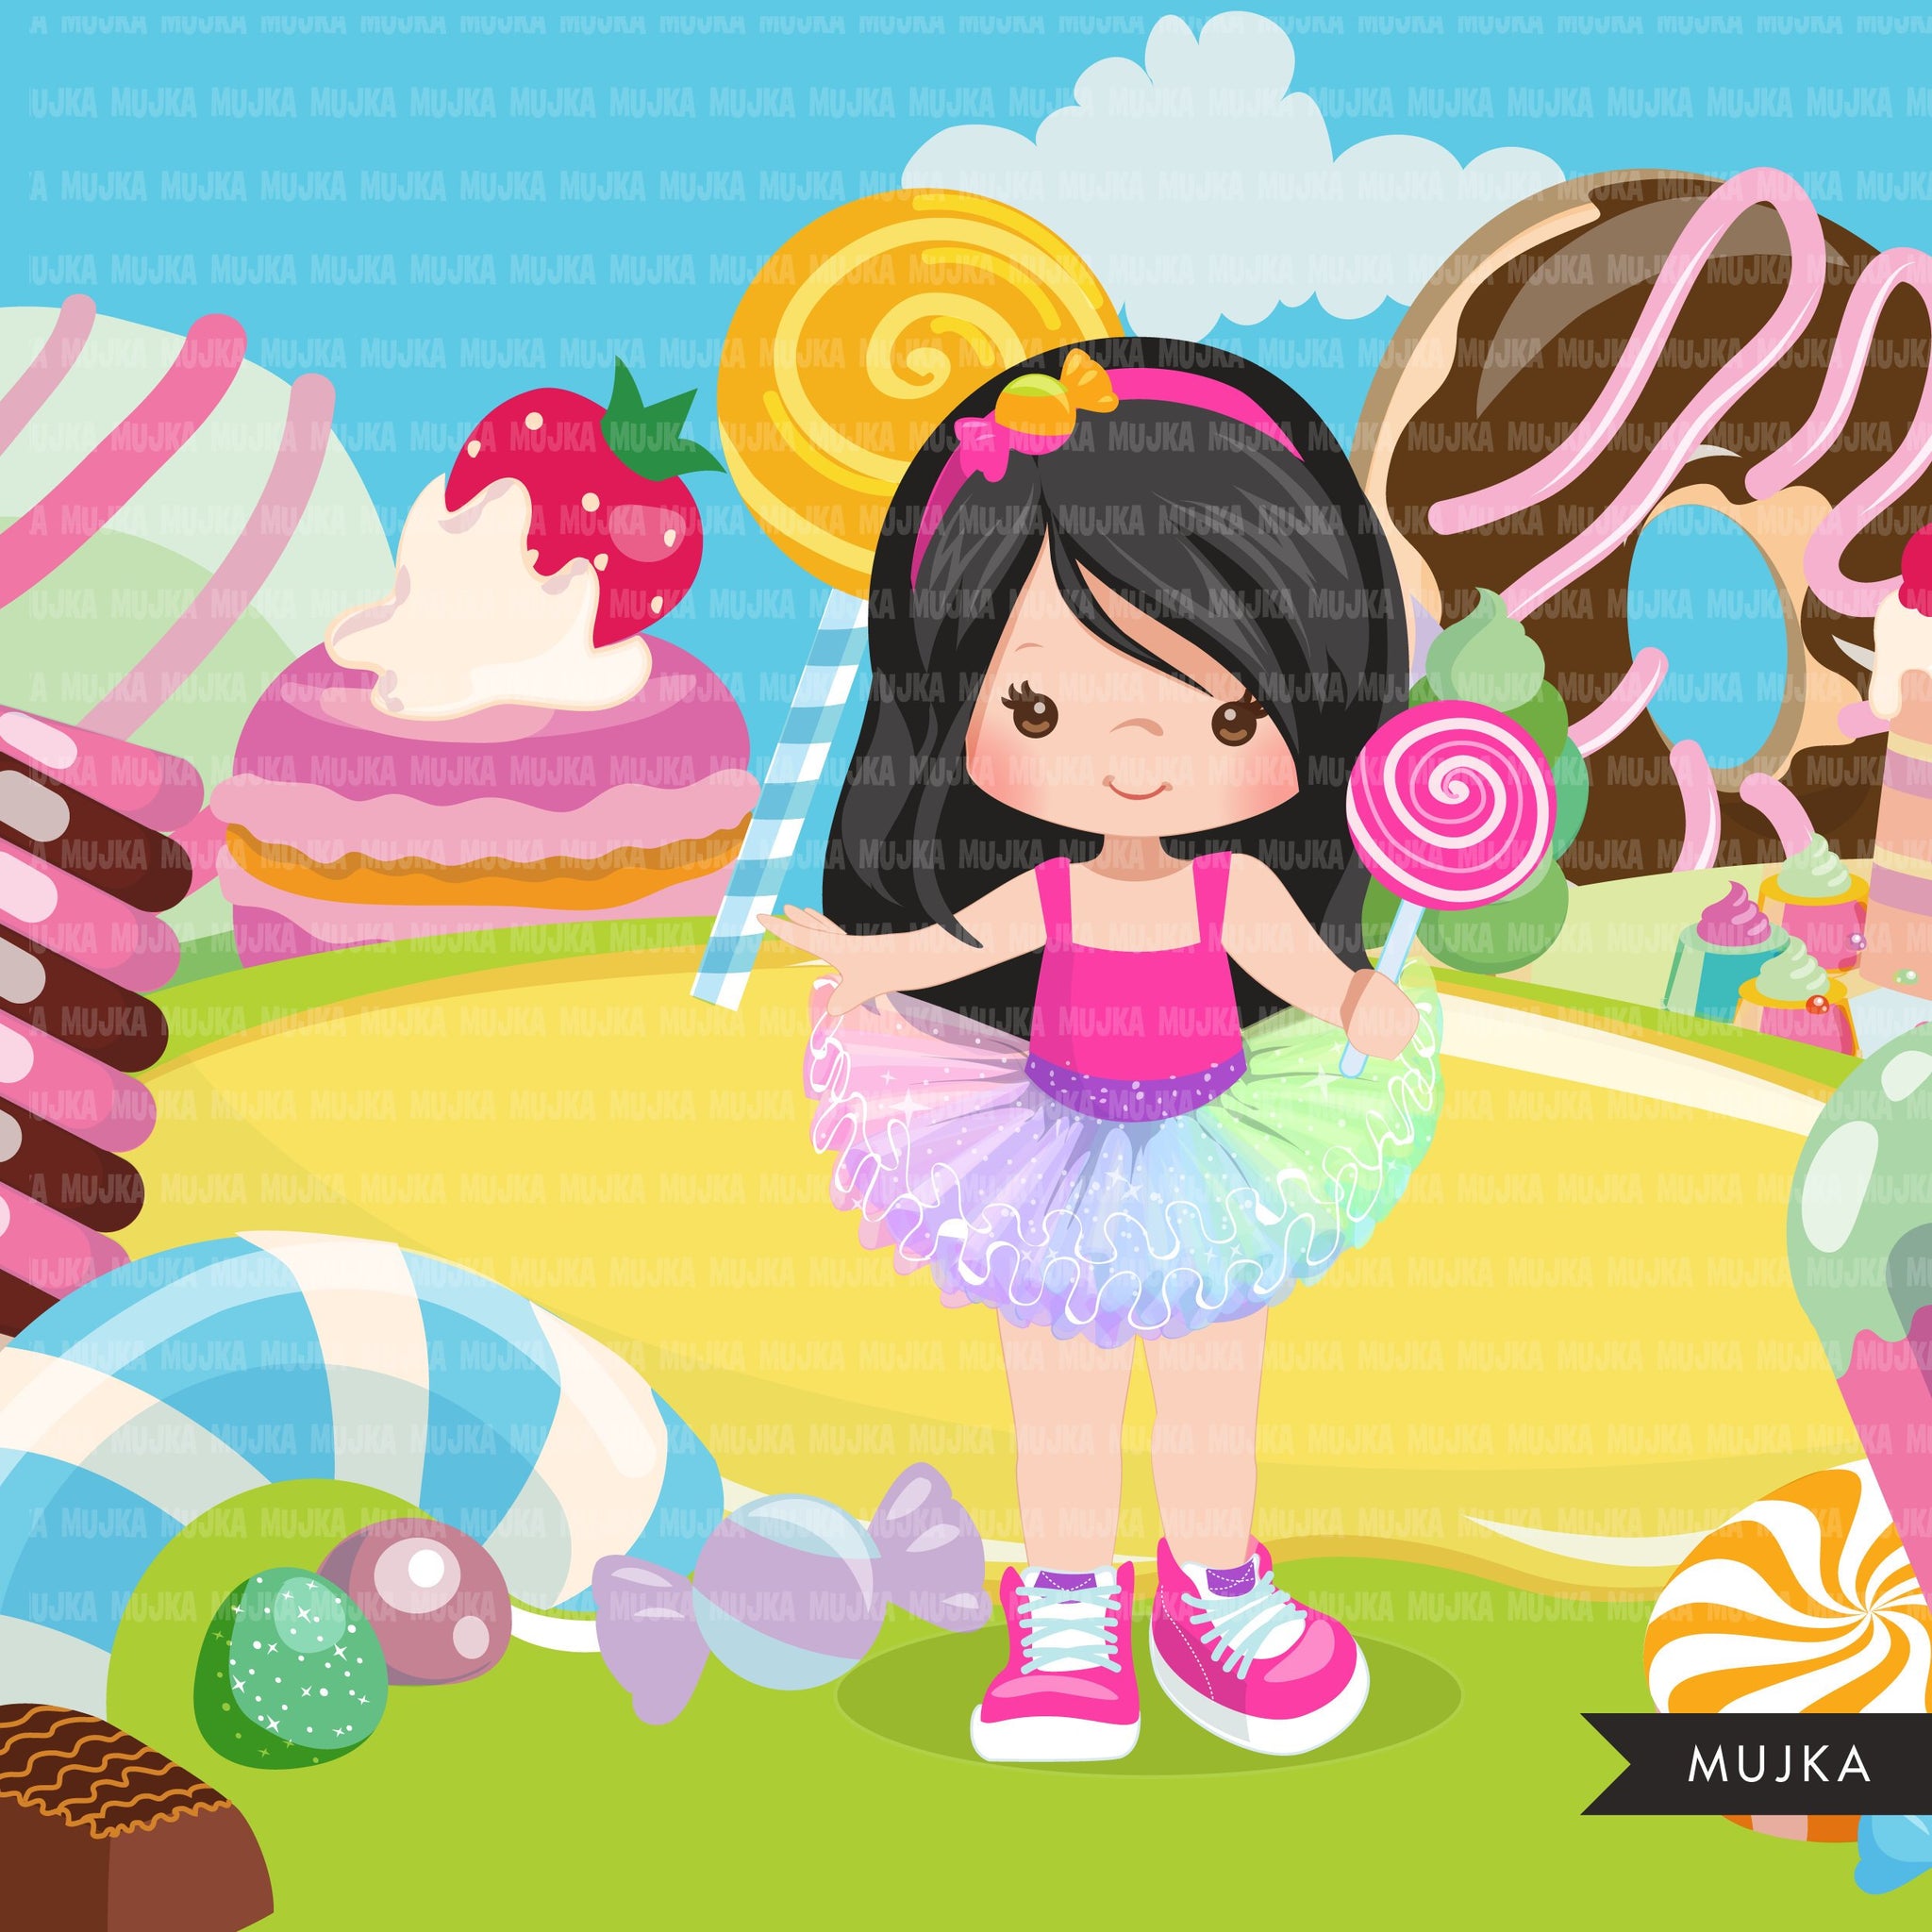 Candy land Backgrounds Clipart, sugar, lollipop rainbow, cupcake, truffles and chocolate graphics, backdrop commercial use printable